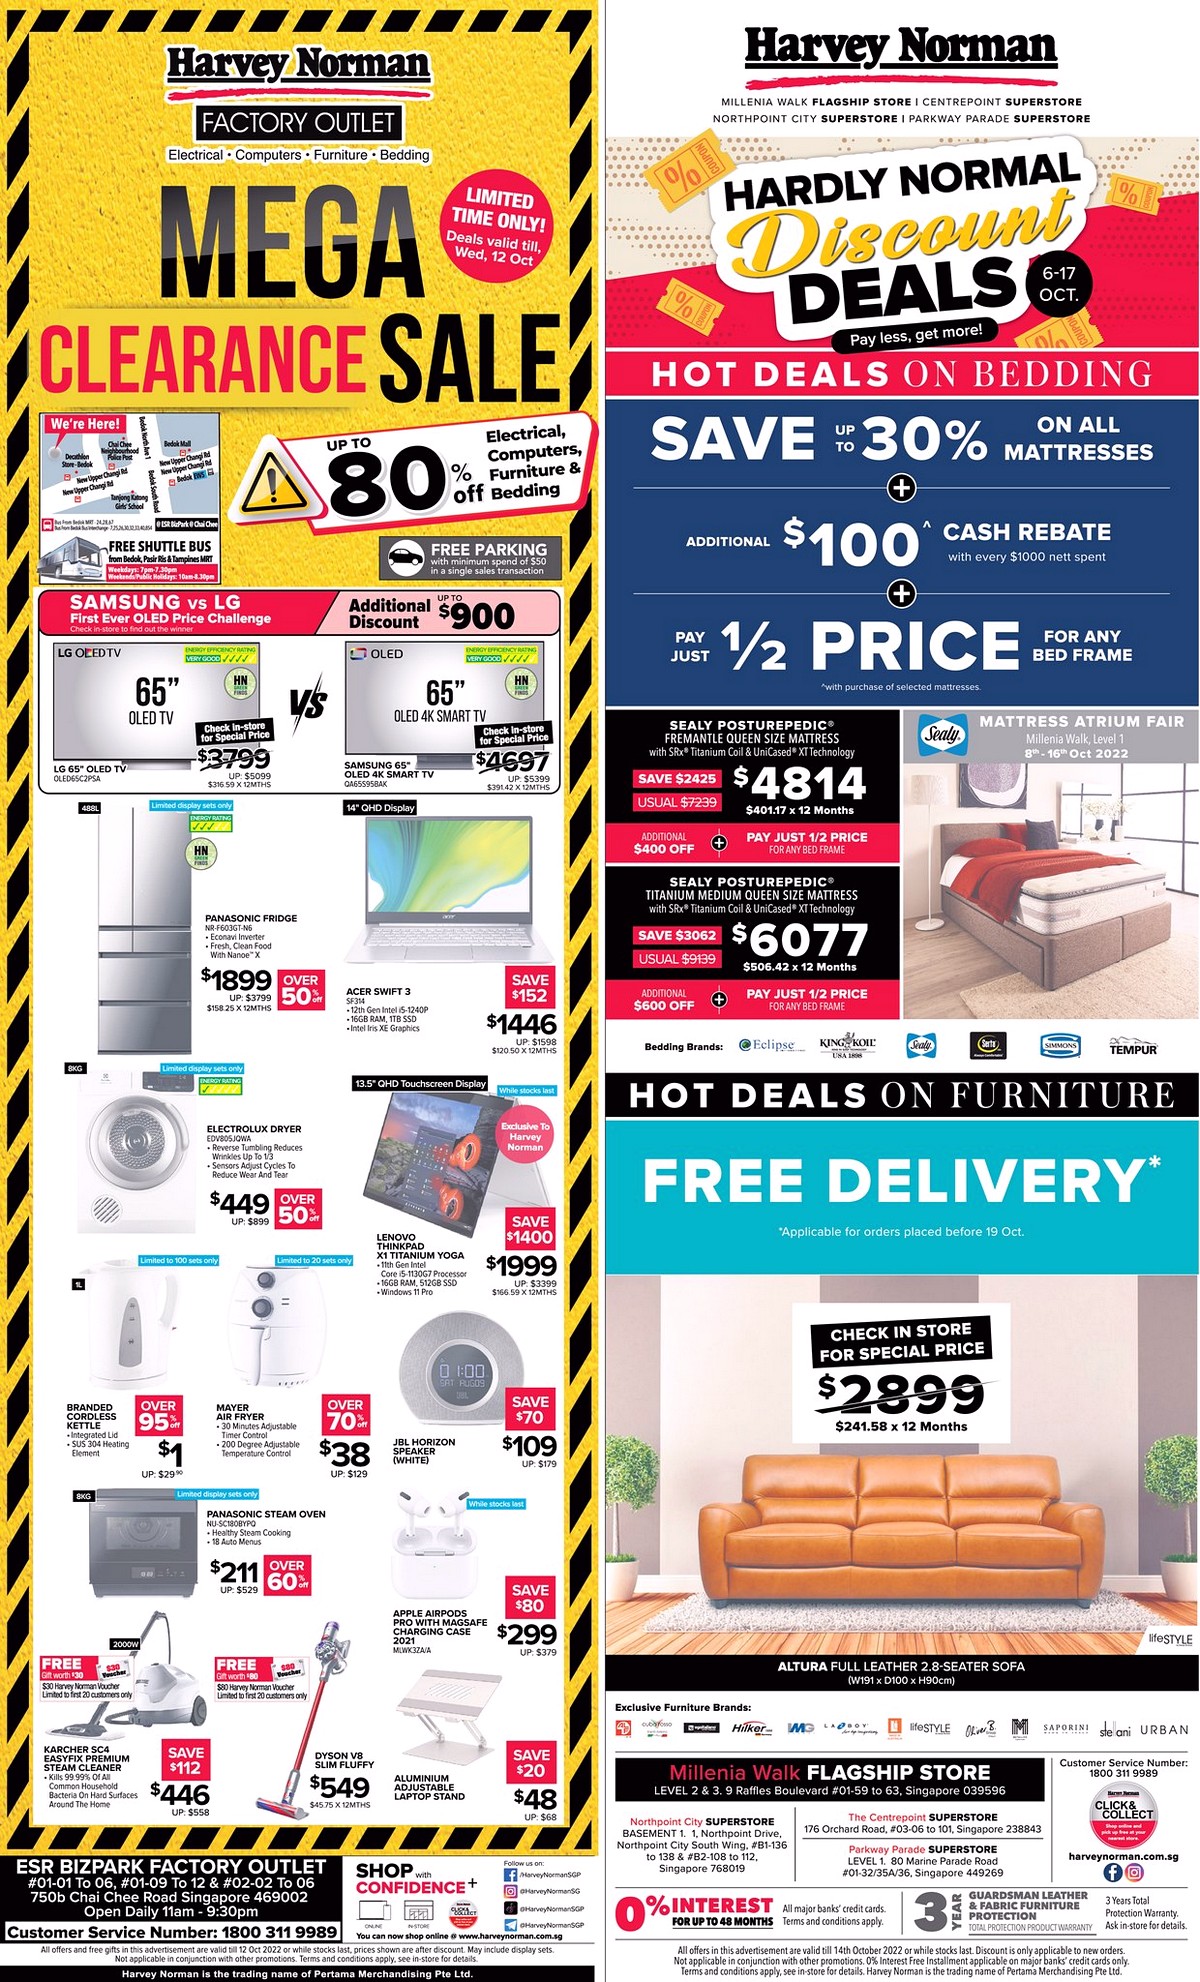 Harvey-Norman-Warehouse-Sale-2022-Singapore-Clearance-Home-Appliances-Mobile-Gadgets-IT-Accessories-Desktop-Computer-Electrical-002-Furnitures-Mattresses 8-14 Oct 2022: Harvey Norman Mega Clearance Sale Islandwide in Singapore